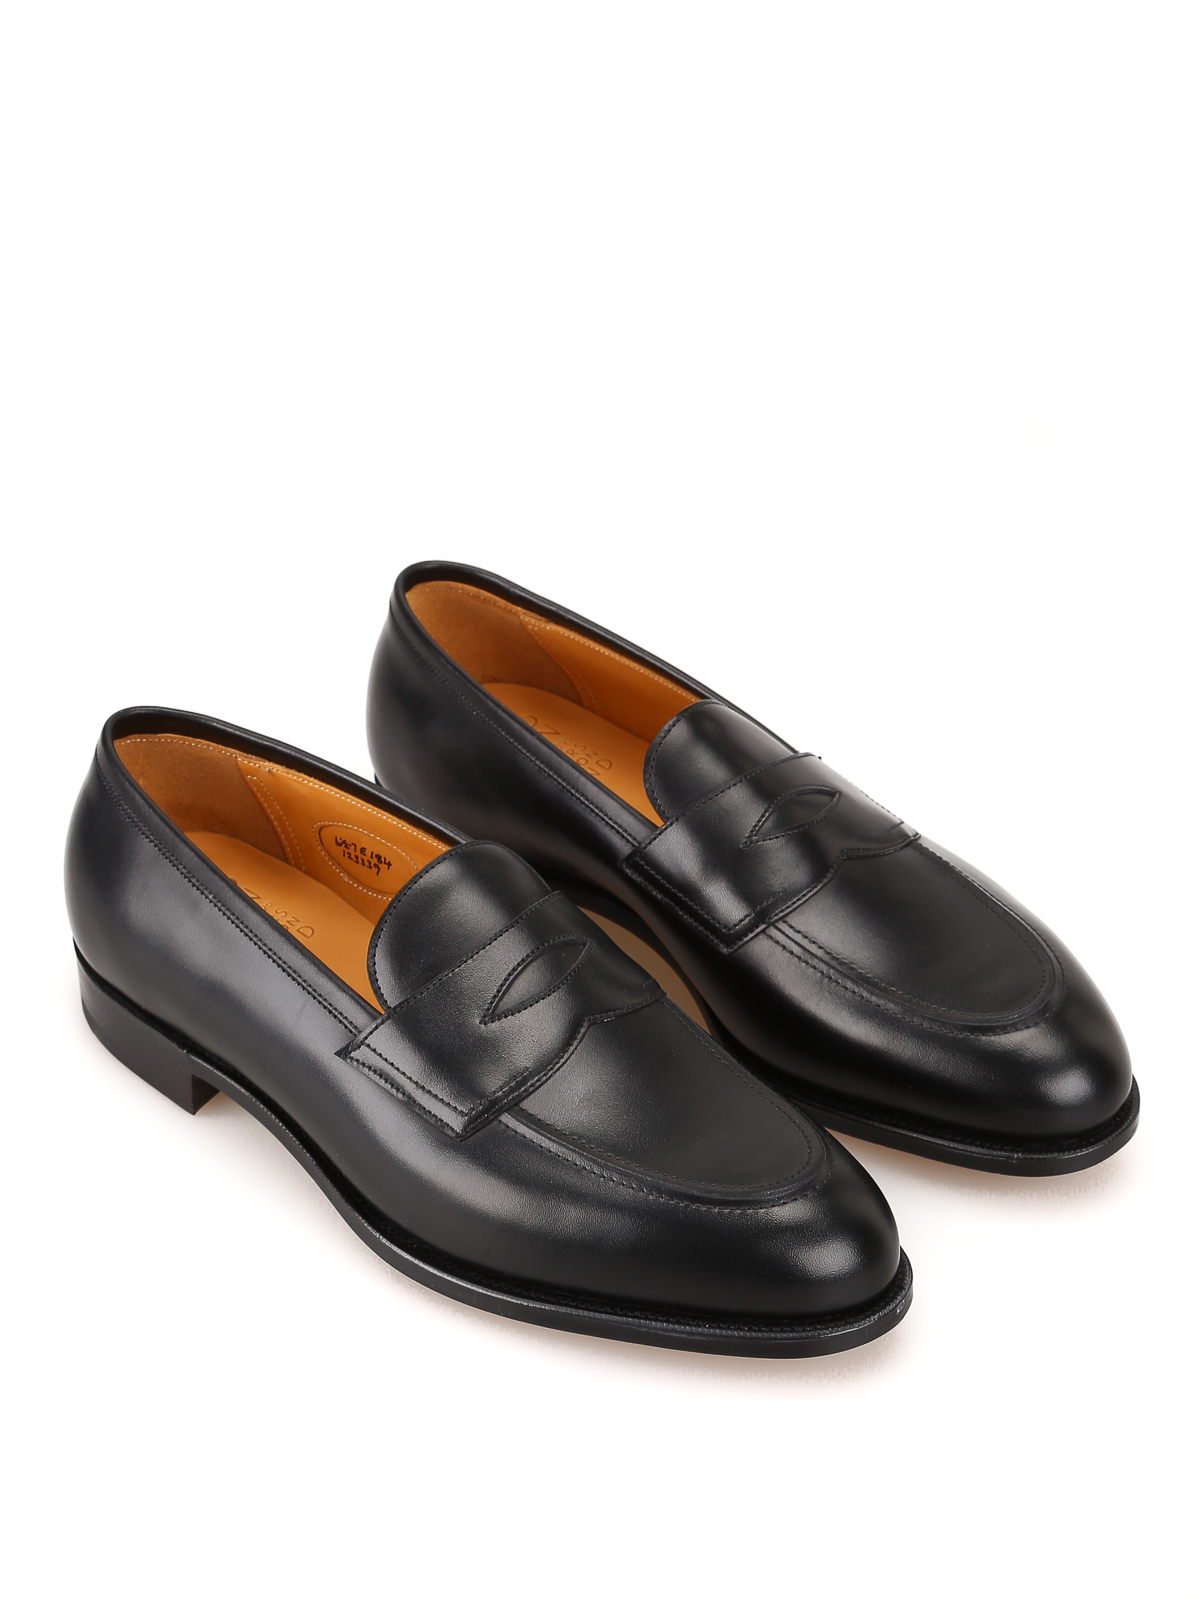 Edward Green Piccadilly calf leather penny loafers - PICCADILLYBLACKCALF